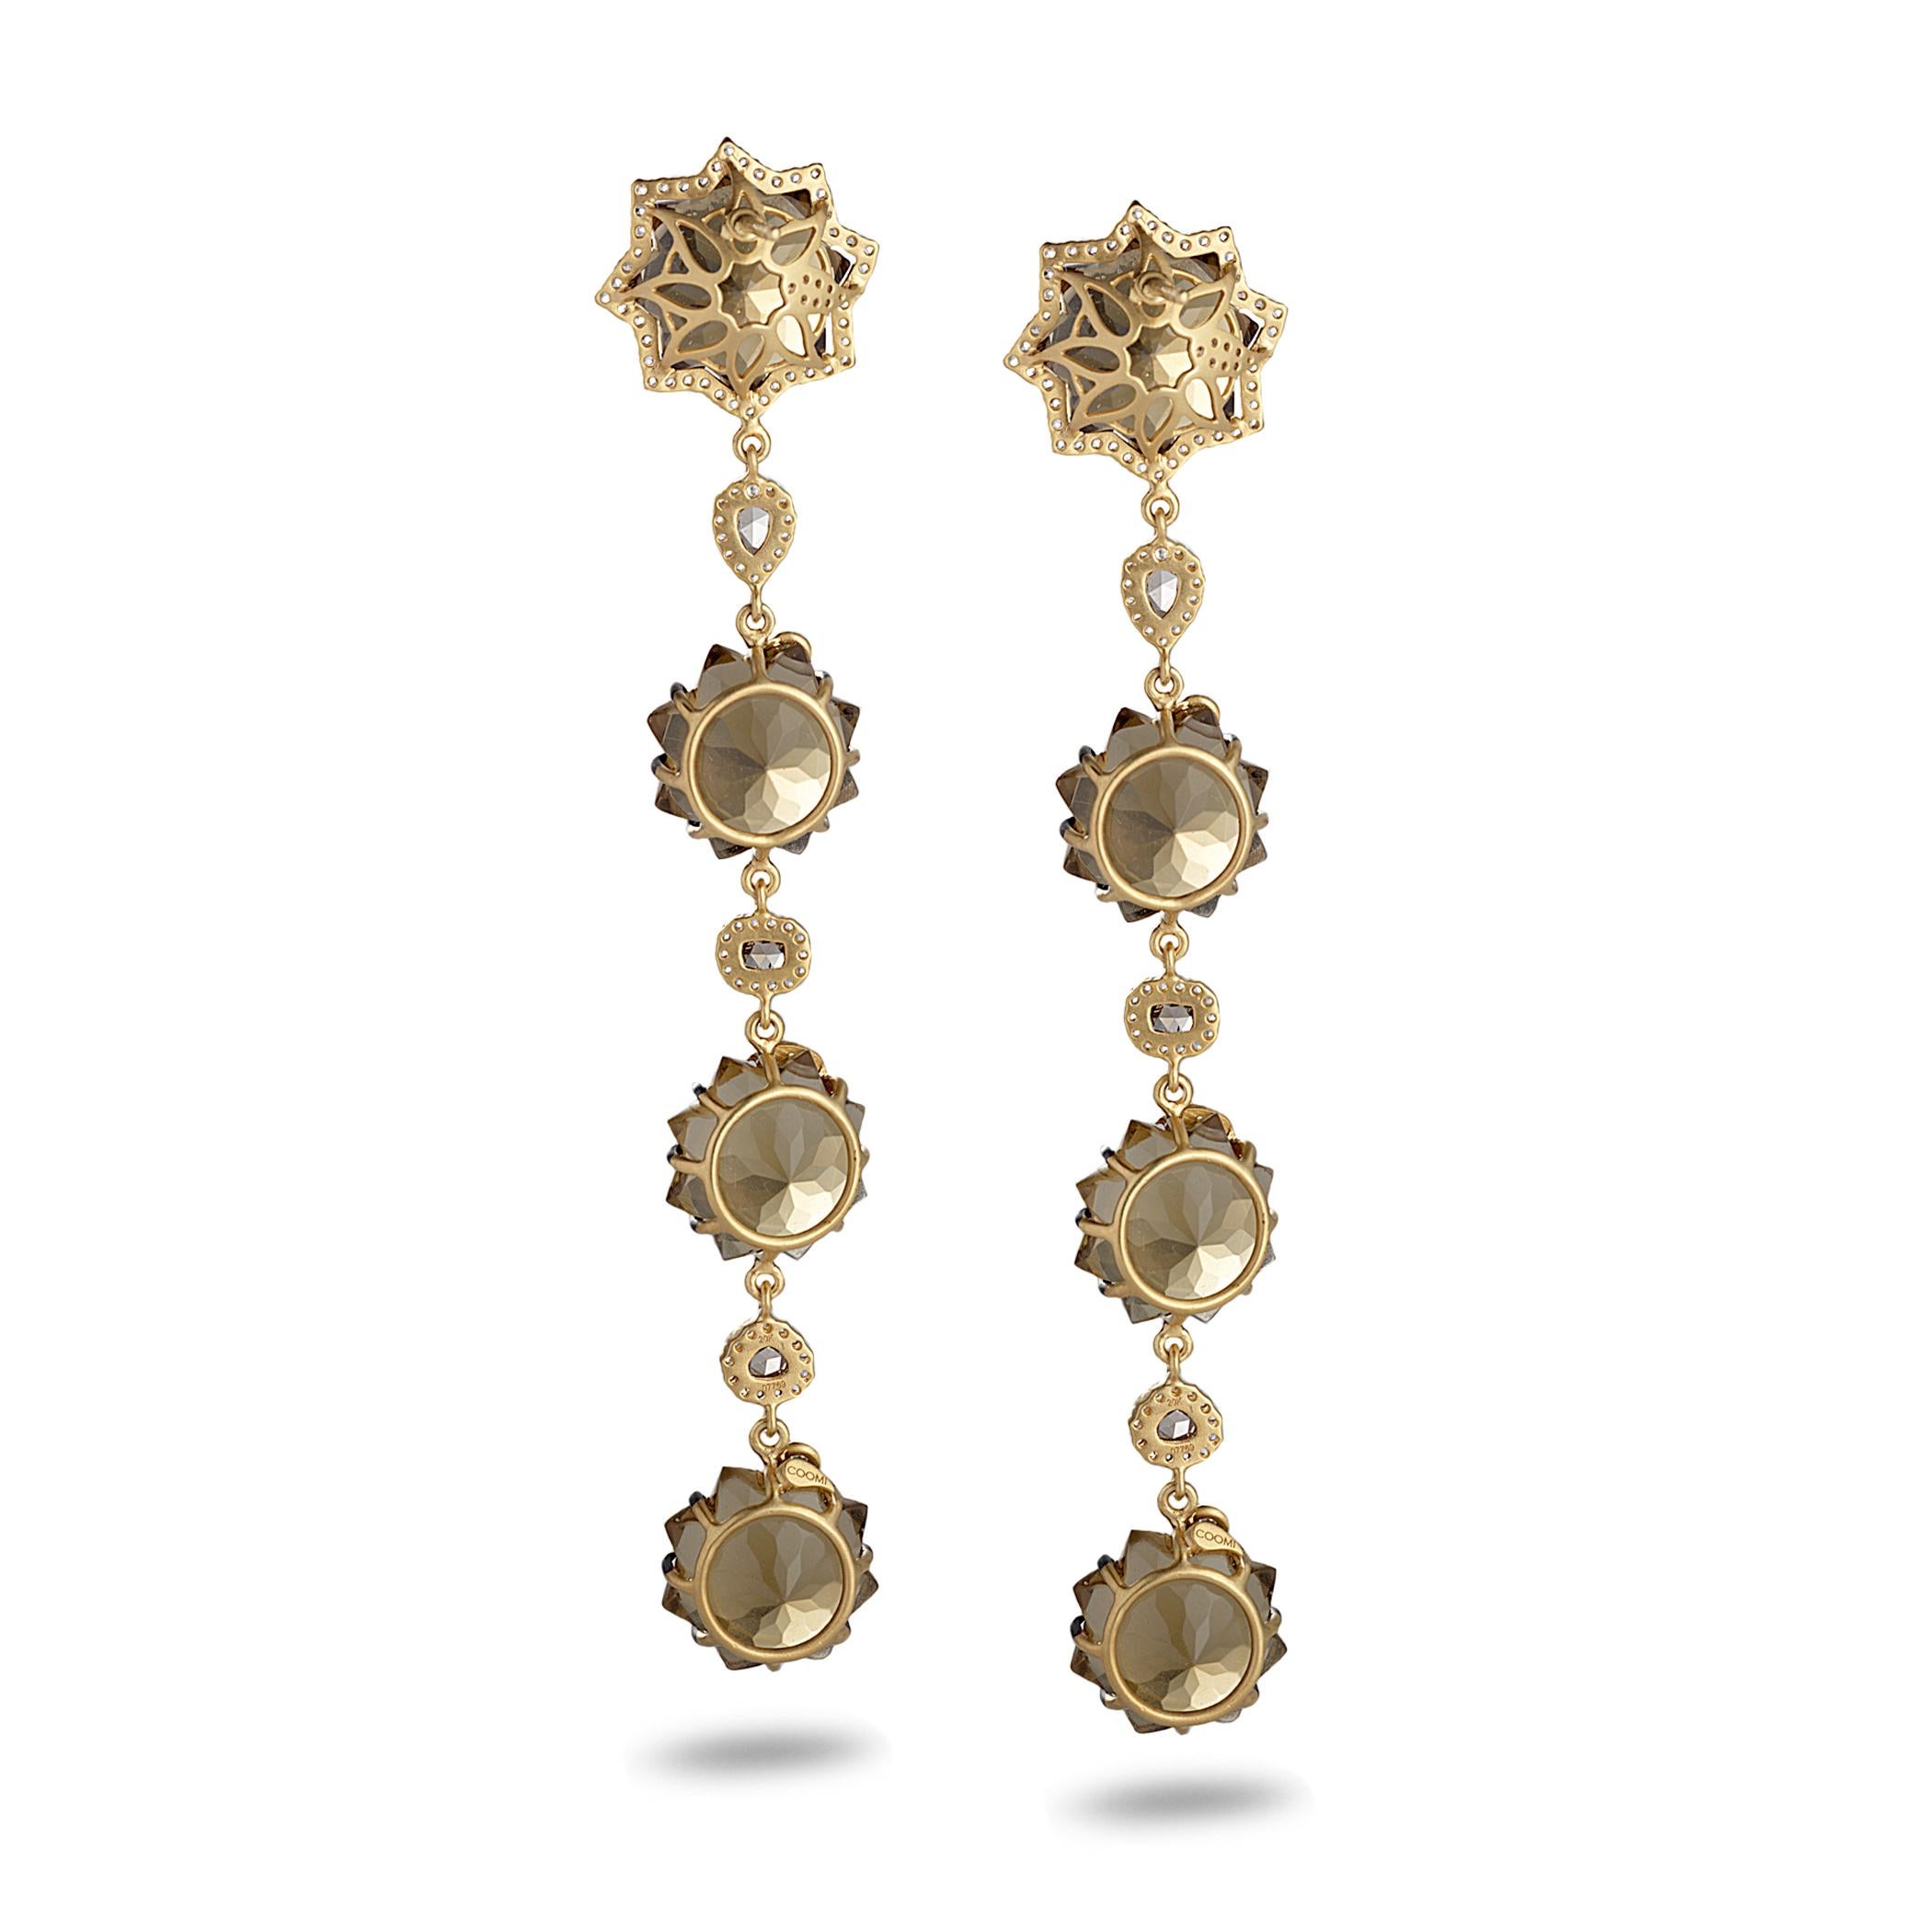 Sagrada Kaleidoscope Earrings Set in 20 karat Yellow Gold with 62.11 Carat Cognac Quartz and 1.83 Carat Rose-Cut Diamonds. The Coomi Sagrada collection was inspired by the doors of the Passion Facade, one of the three grand facades of the Sagrada